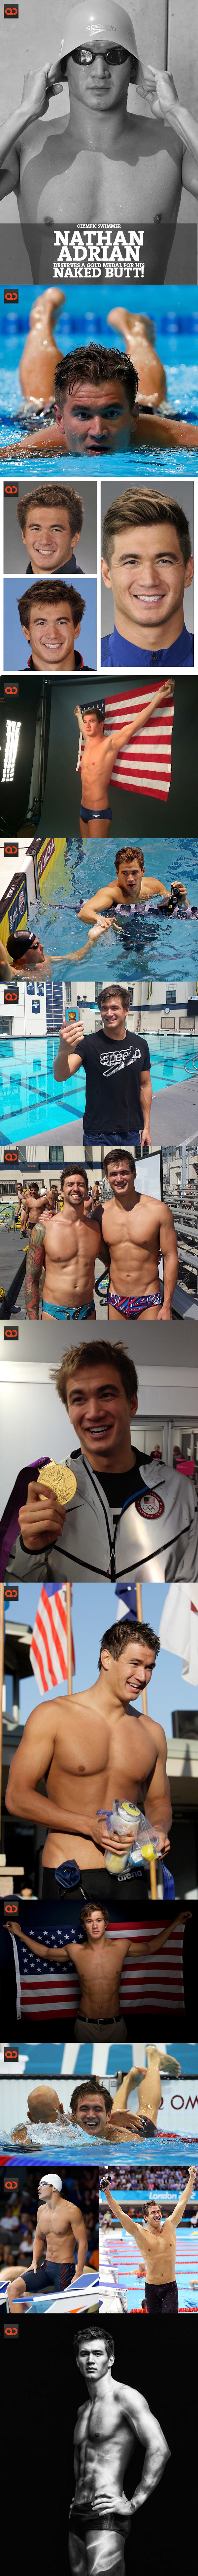 qc-olympic_swimmer_nathan_adrian_naked-collage01